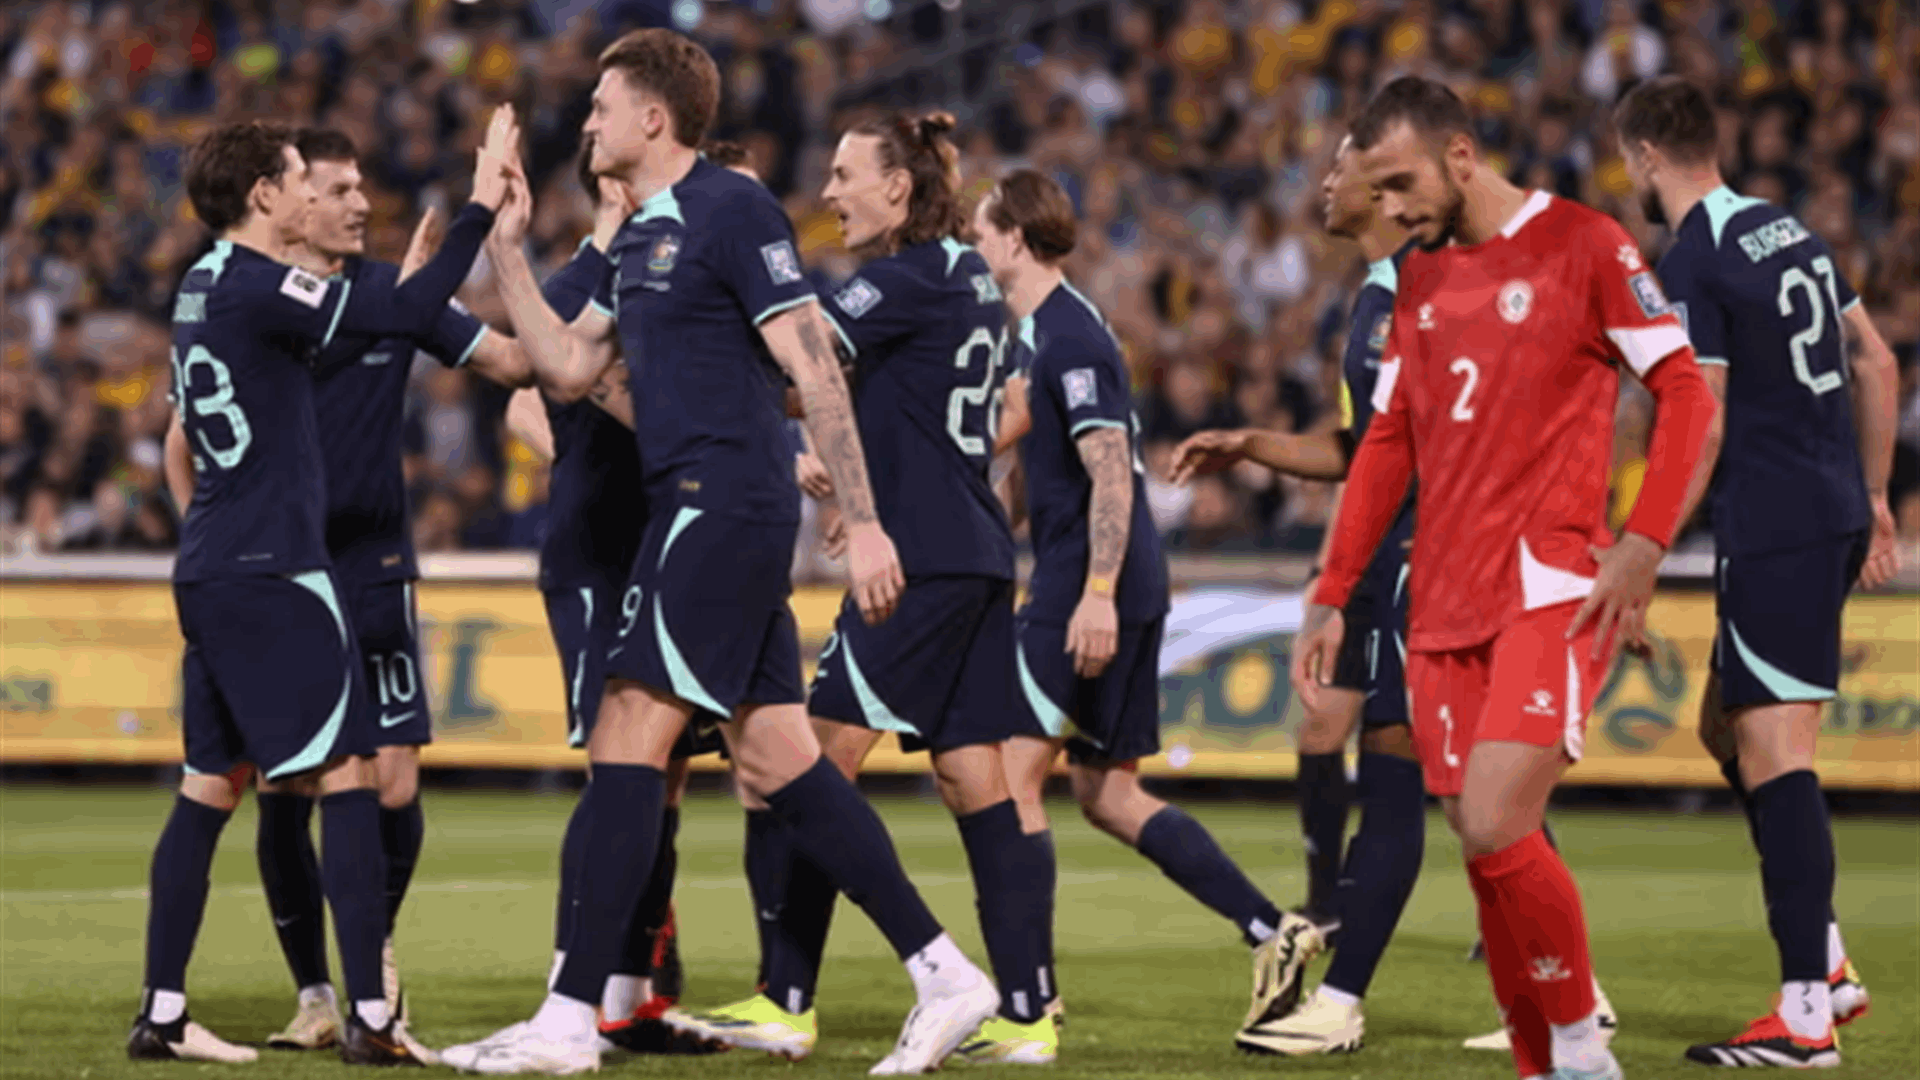 World Cup 2026 qualifier: Australia ends the game with a 5-0 victory over Lebanon 